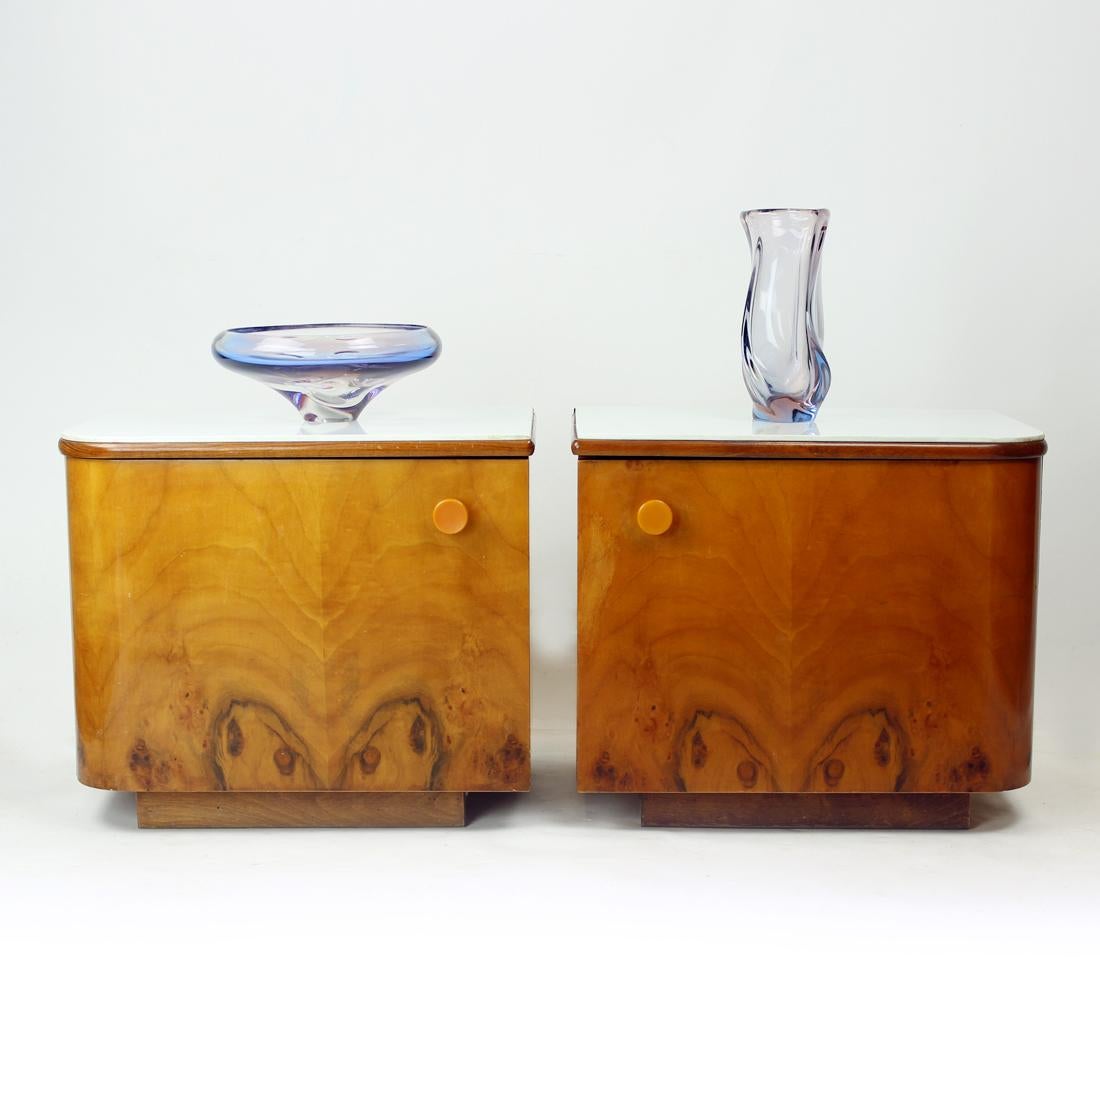 Mid-Century Modern 1960s Bedside Tables In Walnut And White Glass, Czechoslovakia For Sale